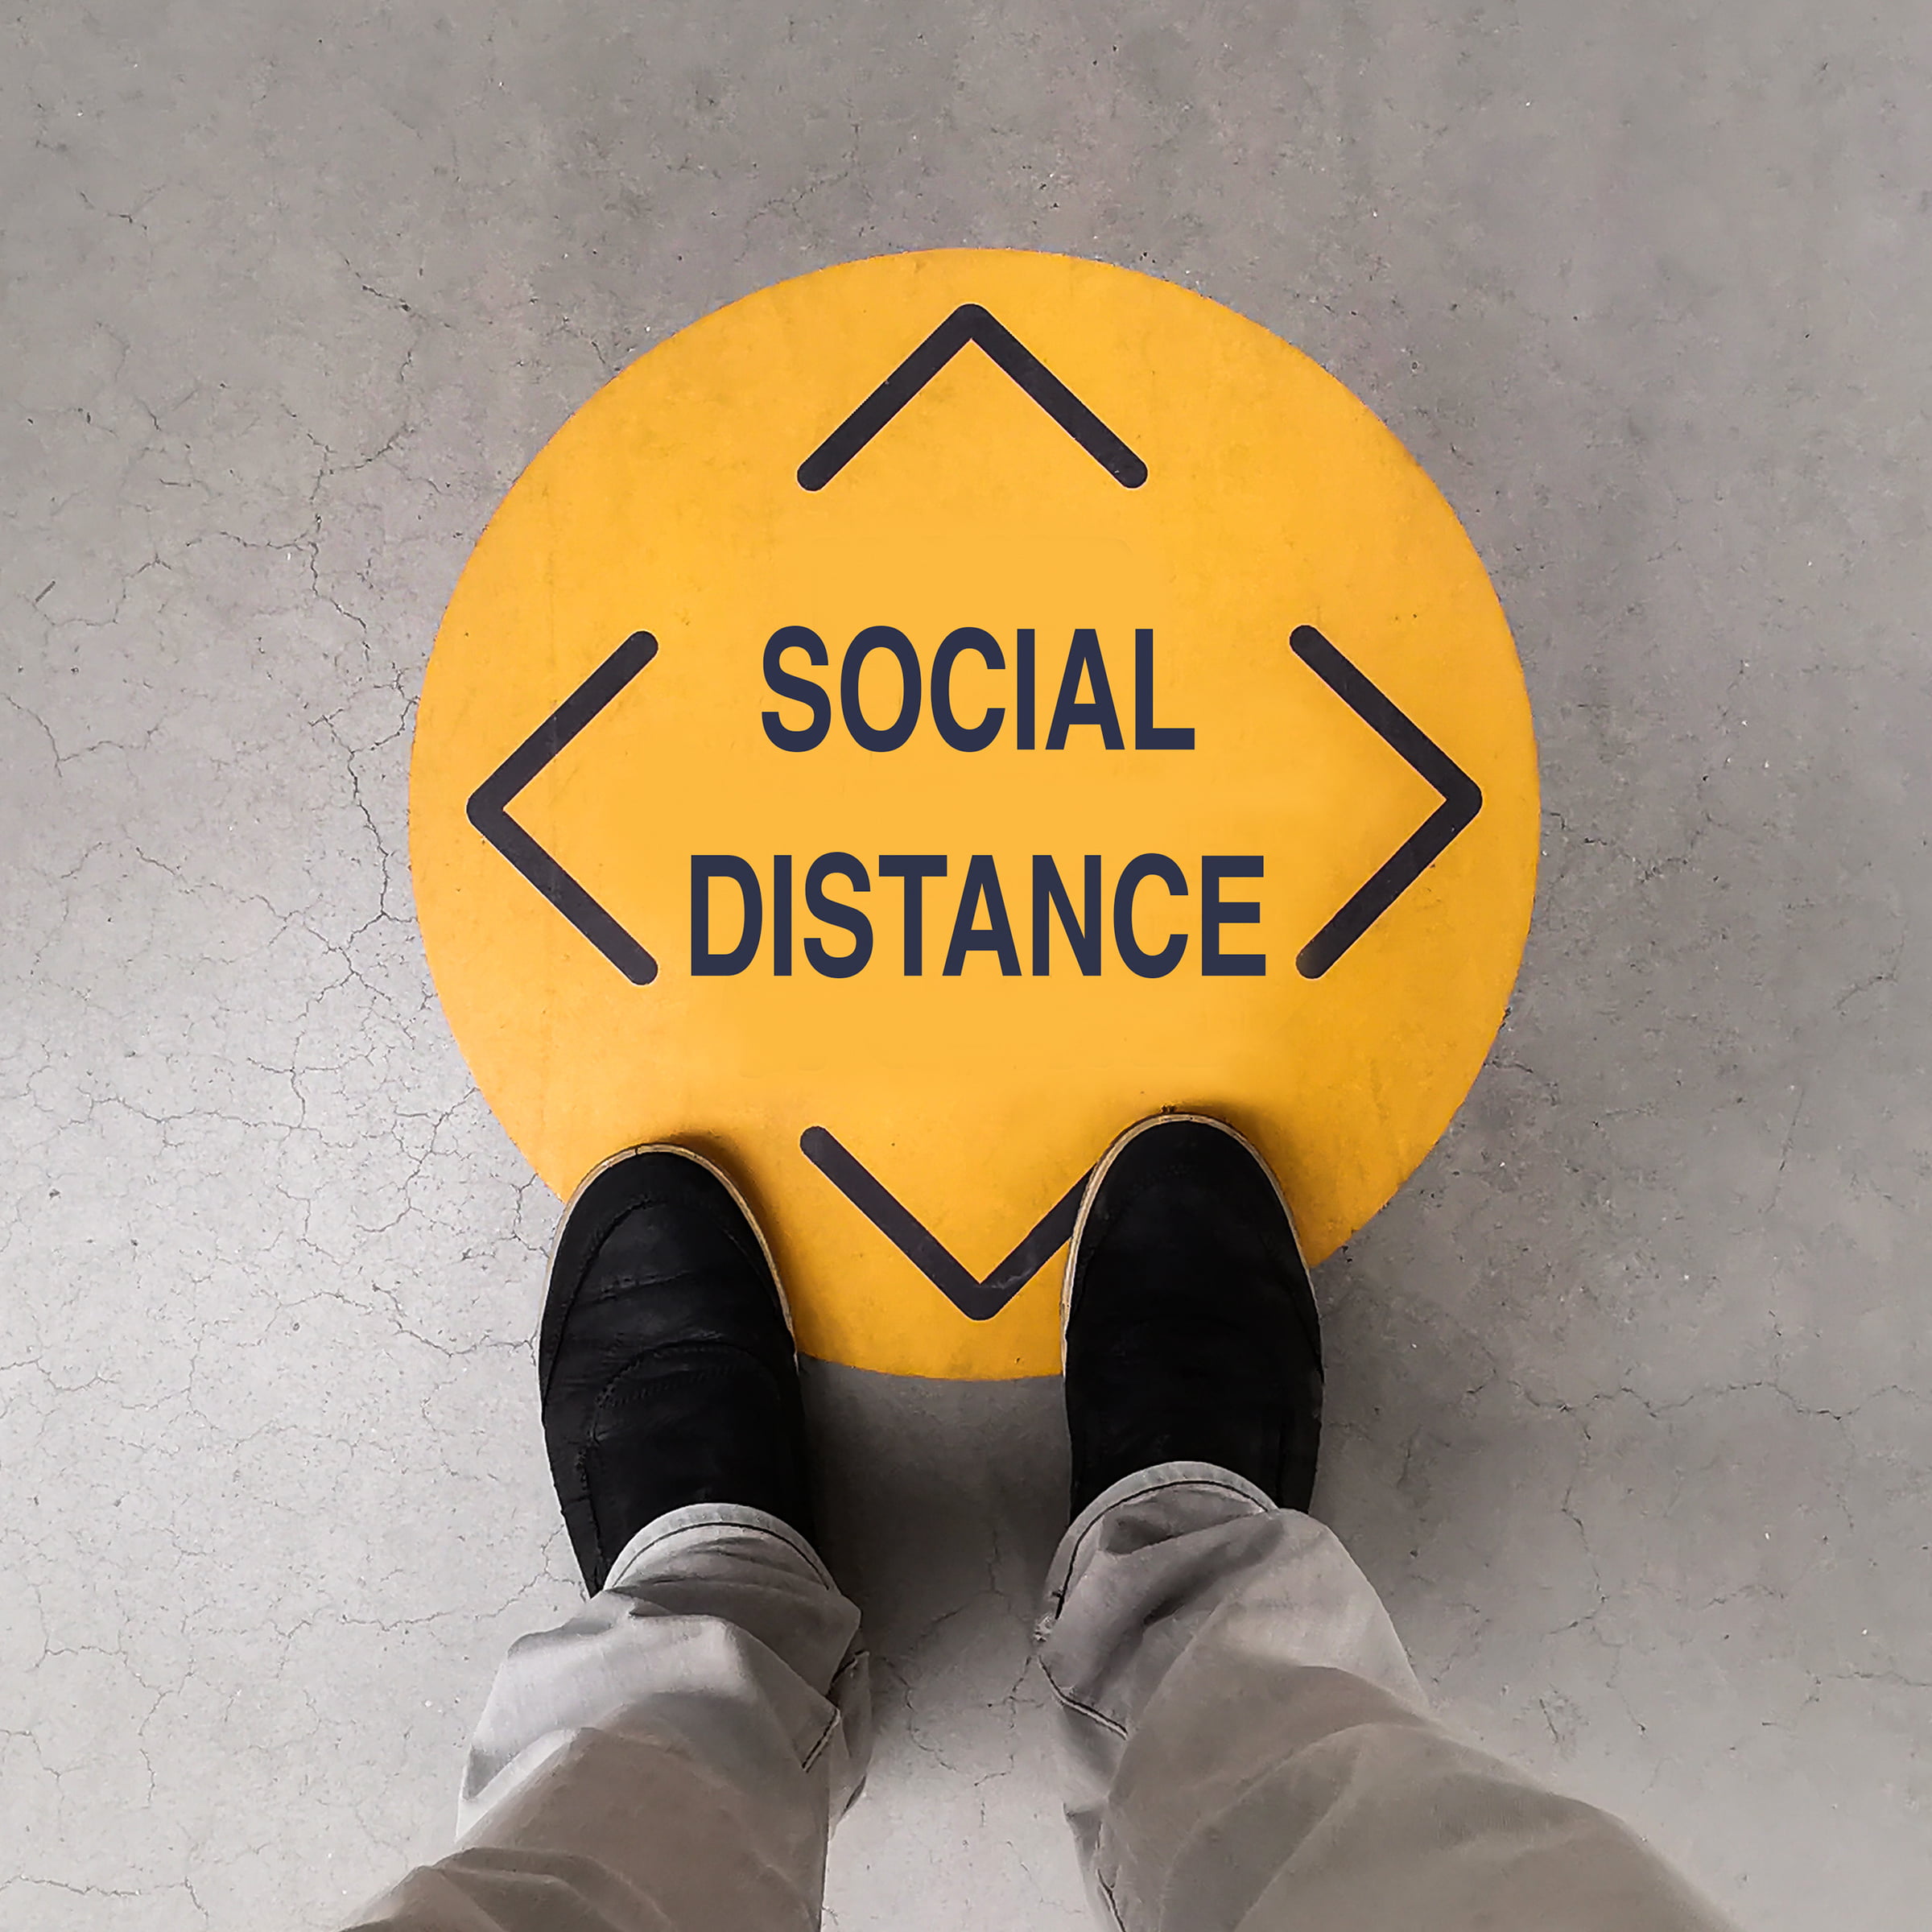 How do you solve the social distancing dilemma post lockdown?